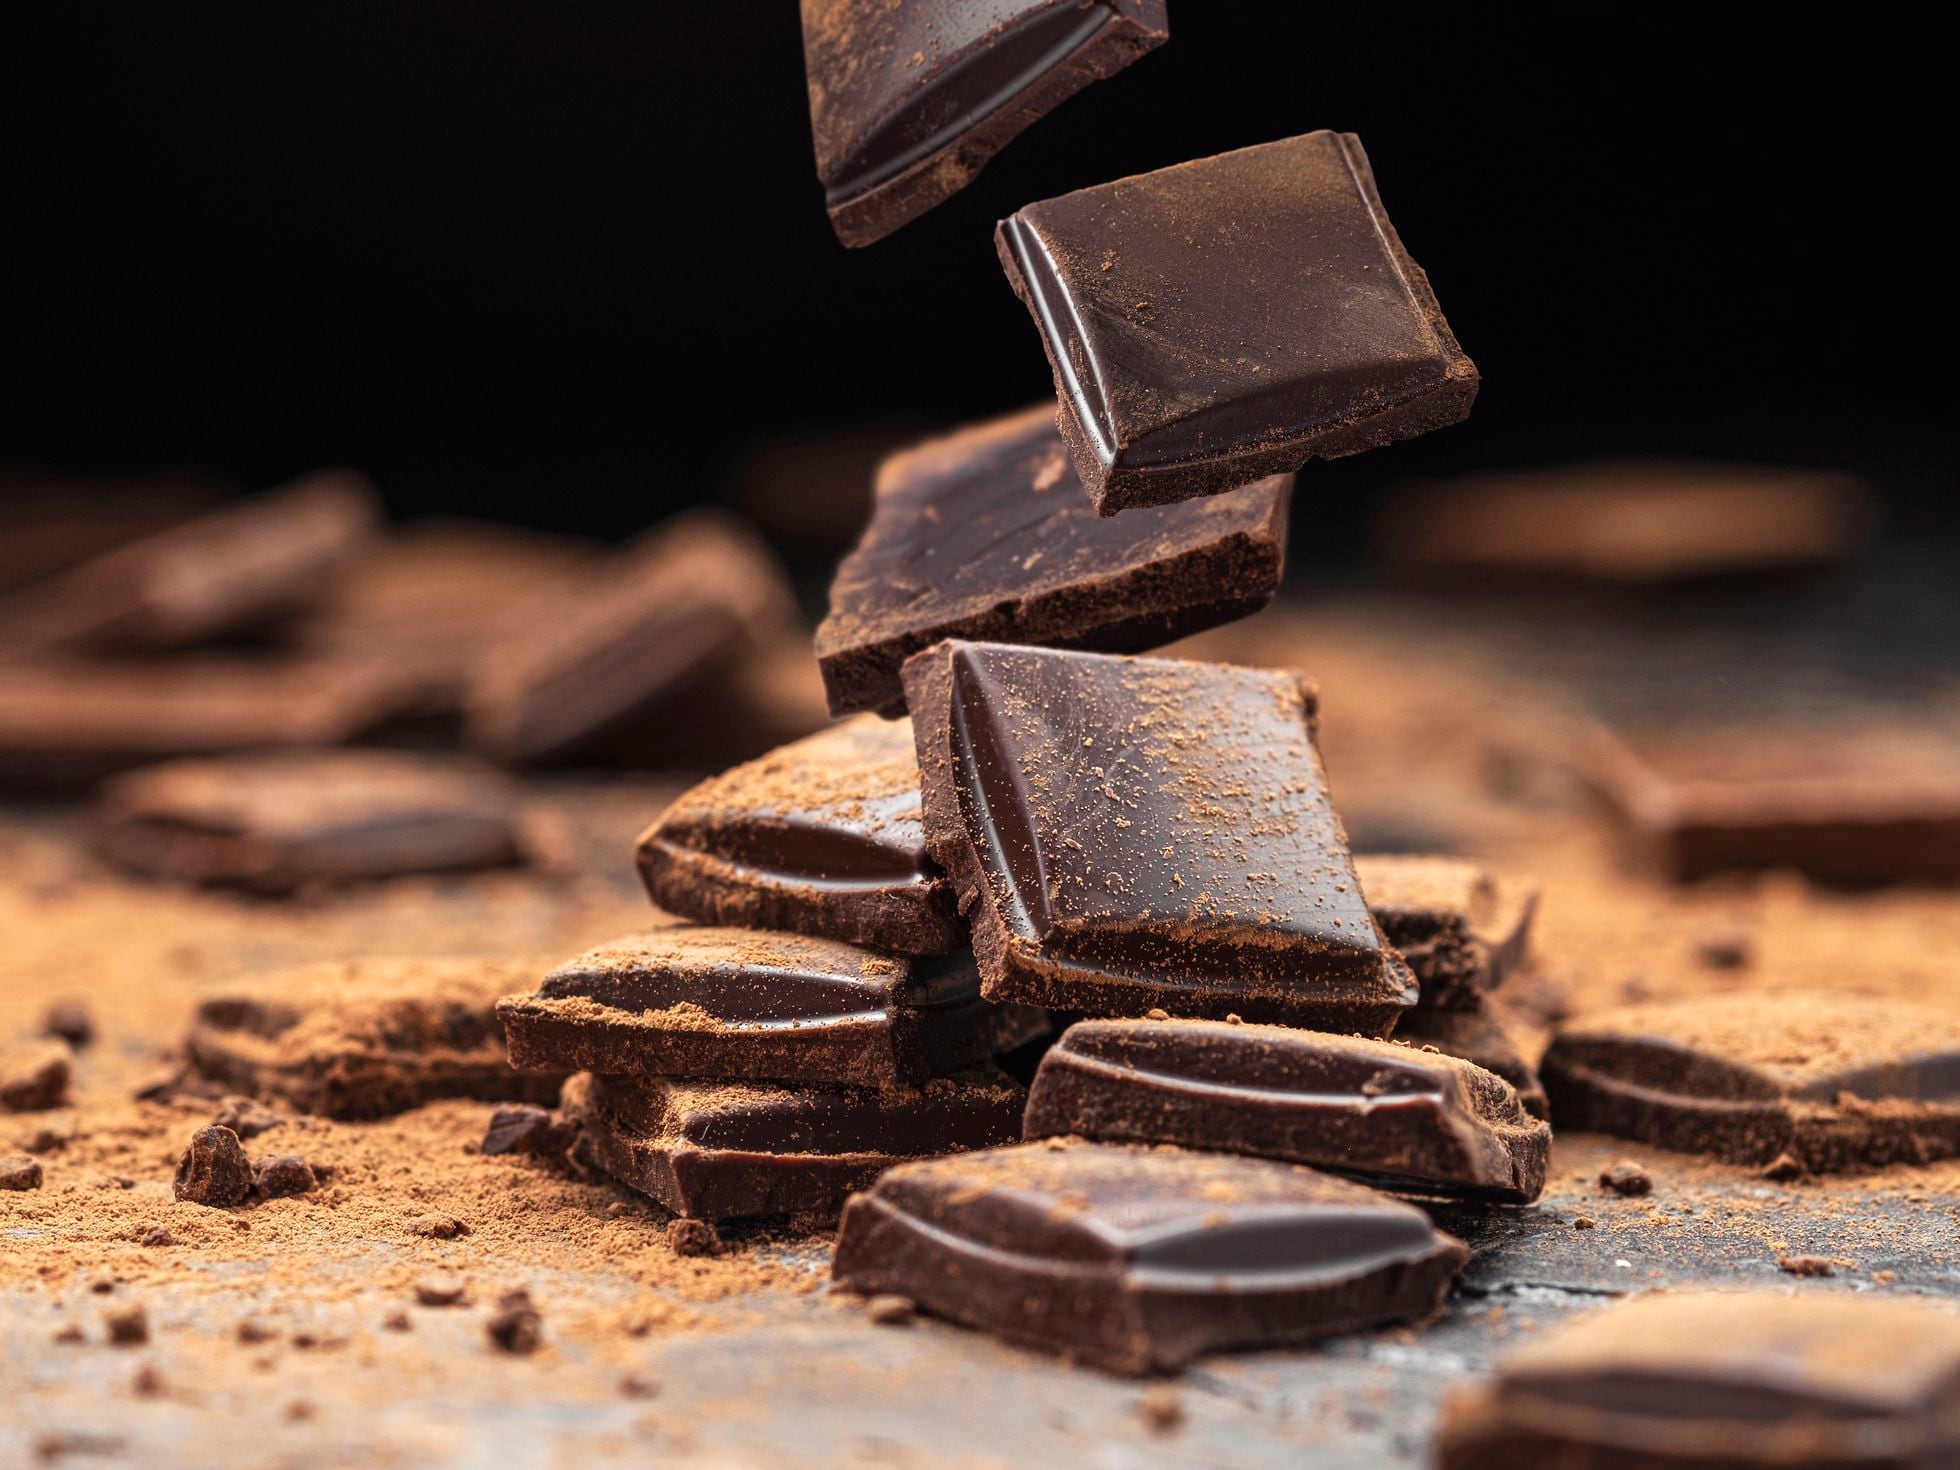 Is it dangerous to eat dark chocolate because of its cadmium and lead content? | Health | EL PAÍS English